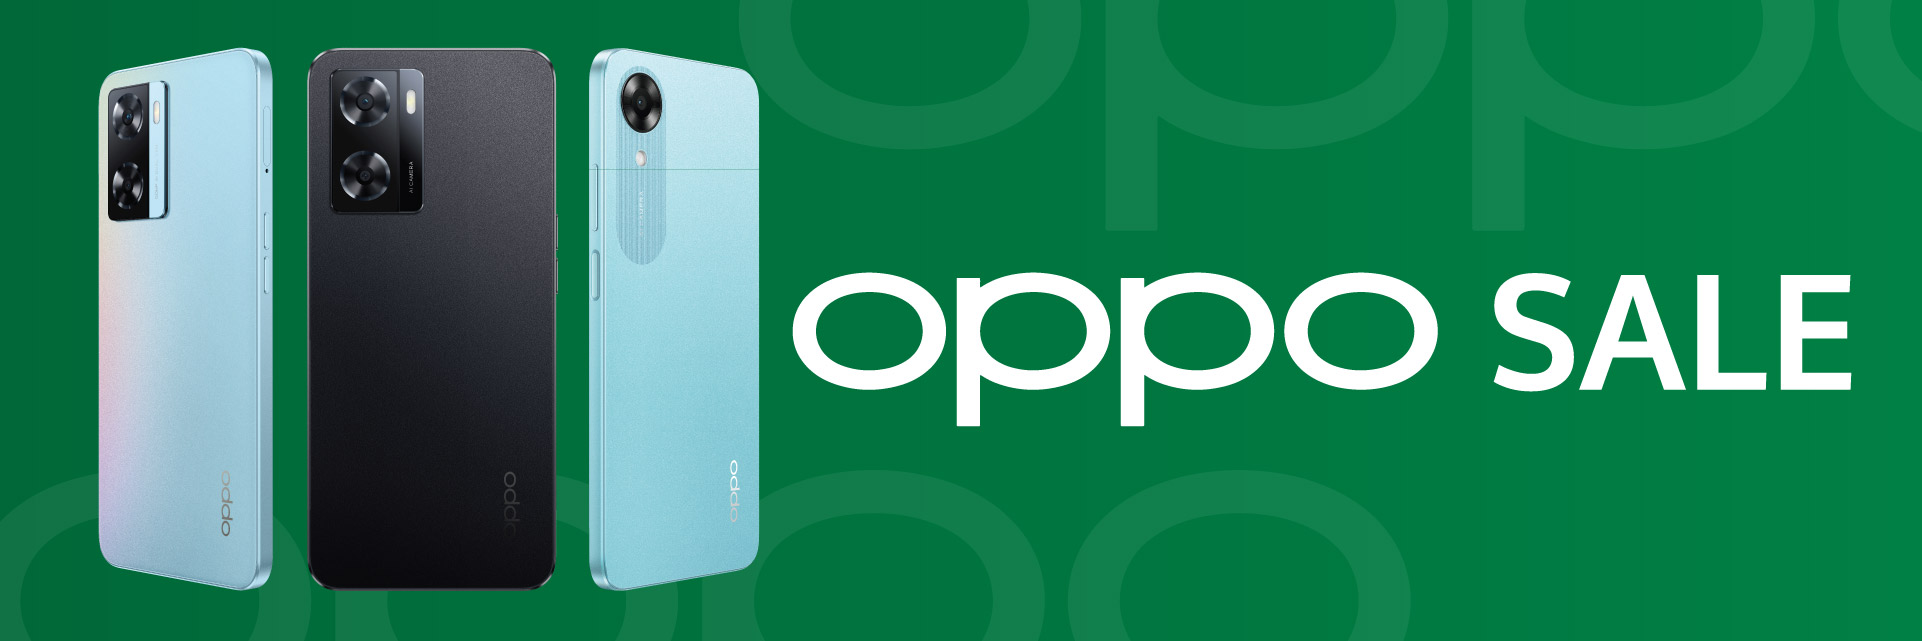 The Oppo Sale